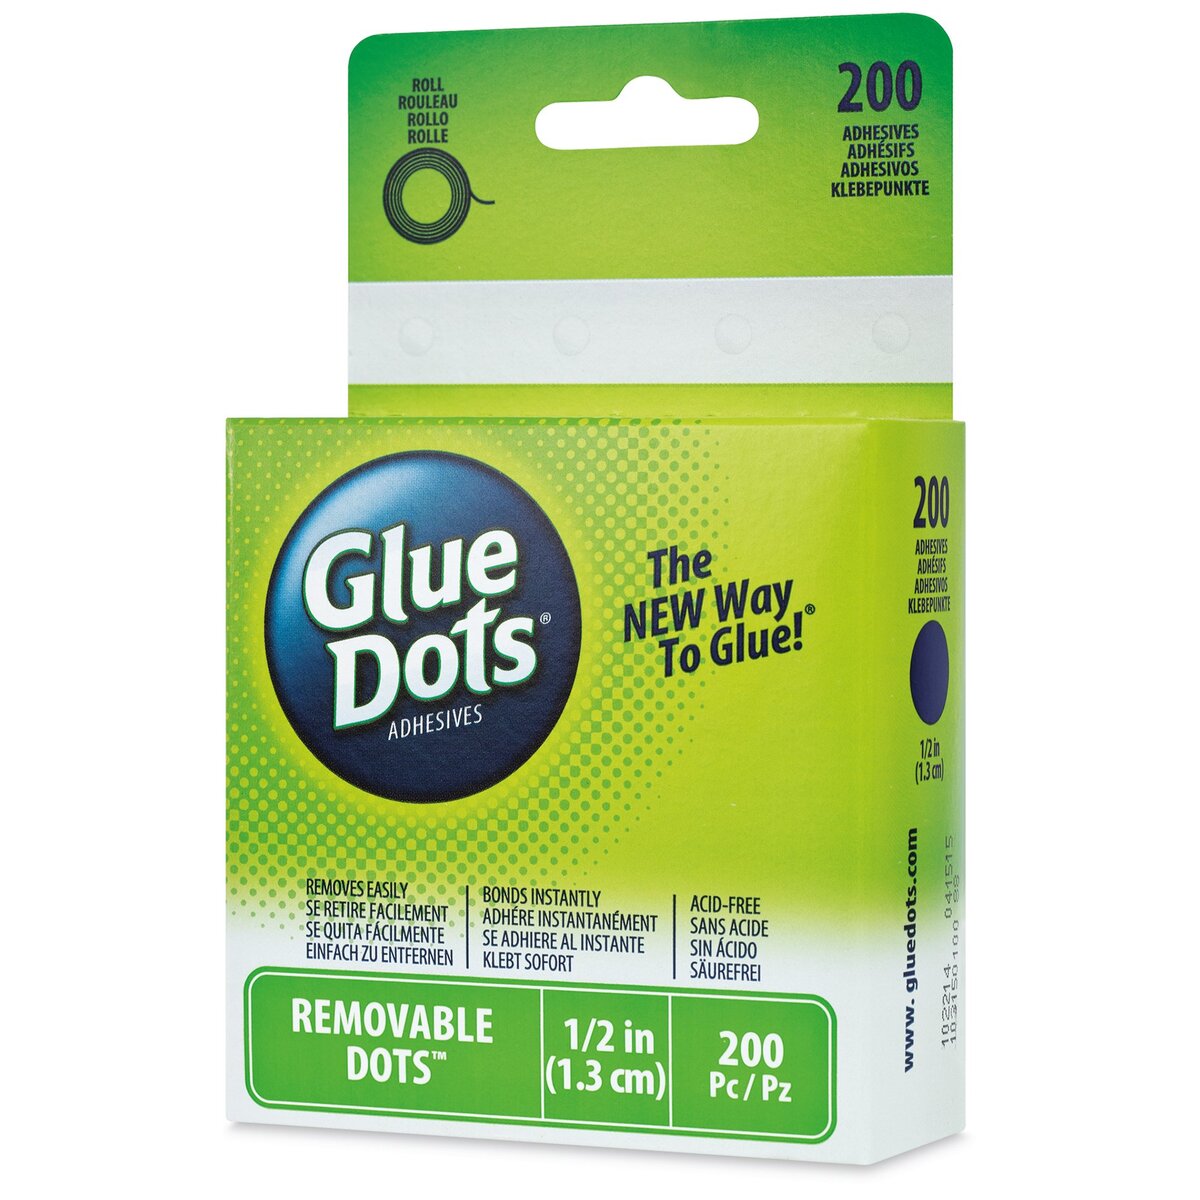 Glue Dots Vellum Adhesive Sheets Removable - 634524081803